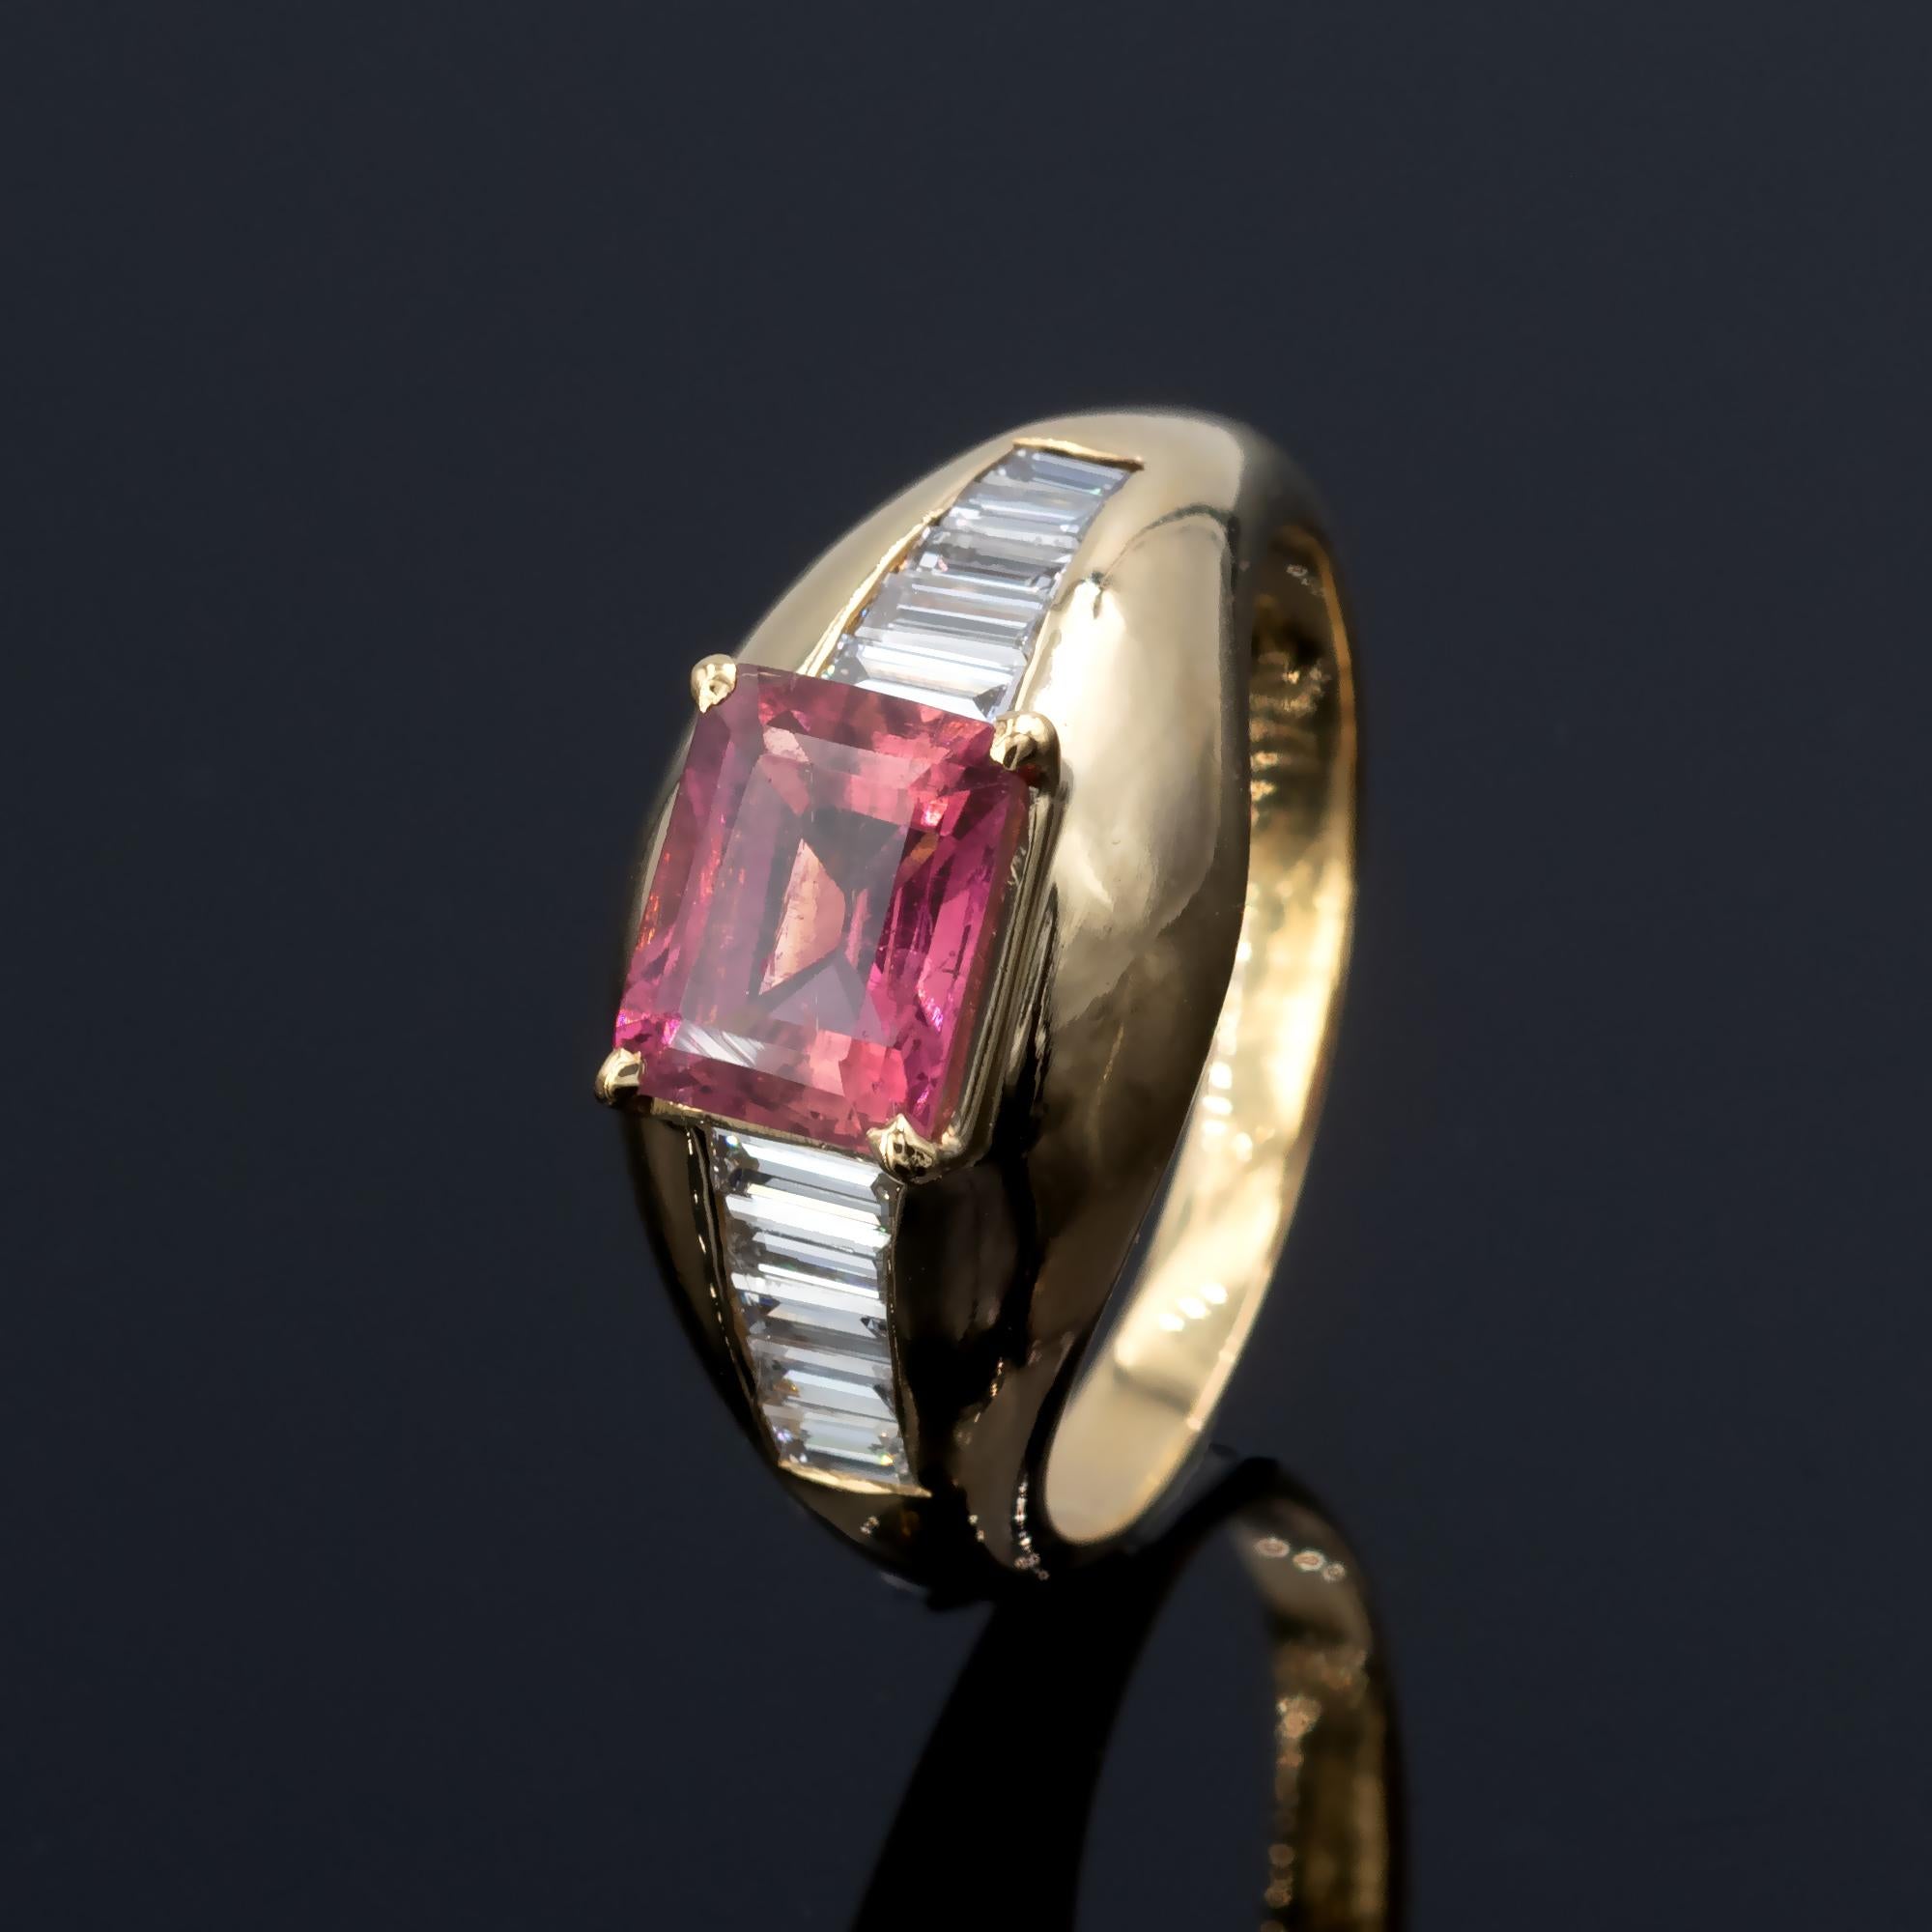 This stunning ring features a vibrant pink tourmaline at its center, cut in an elegant emerald shape. The tourmaline is set in a bold, high-polish 18 karat yellow gold band, which beautifully complements the gemstone's rich hue. The design is pure,